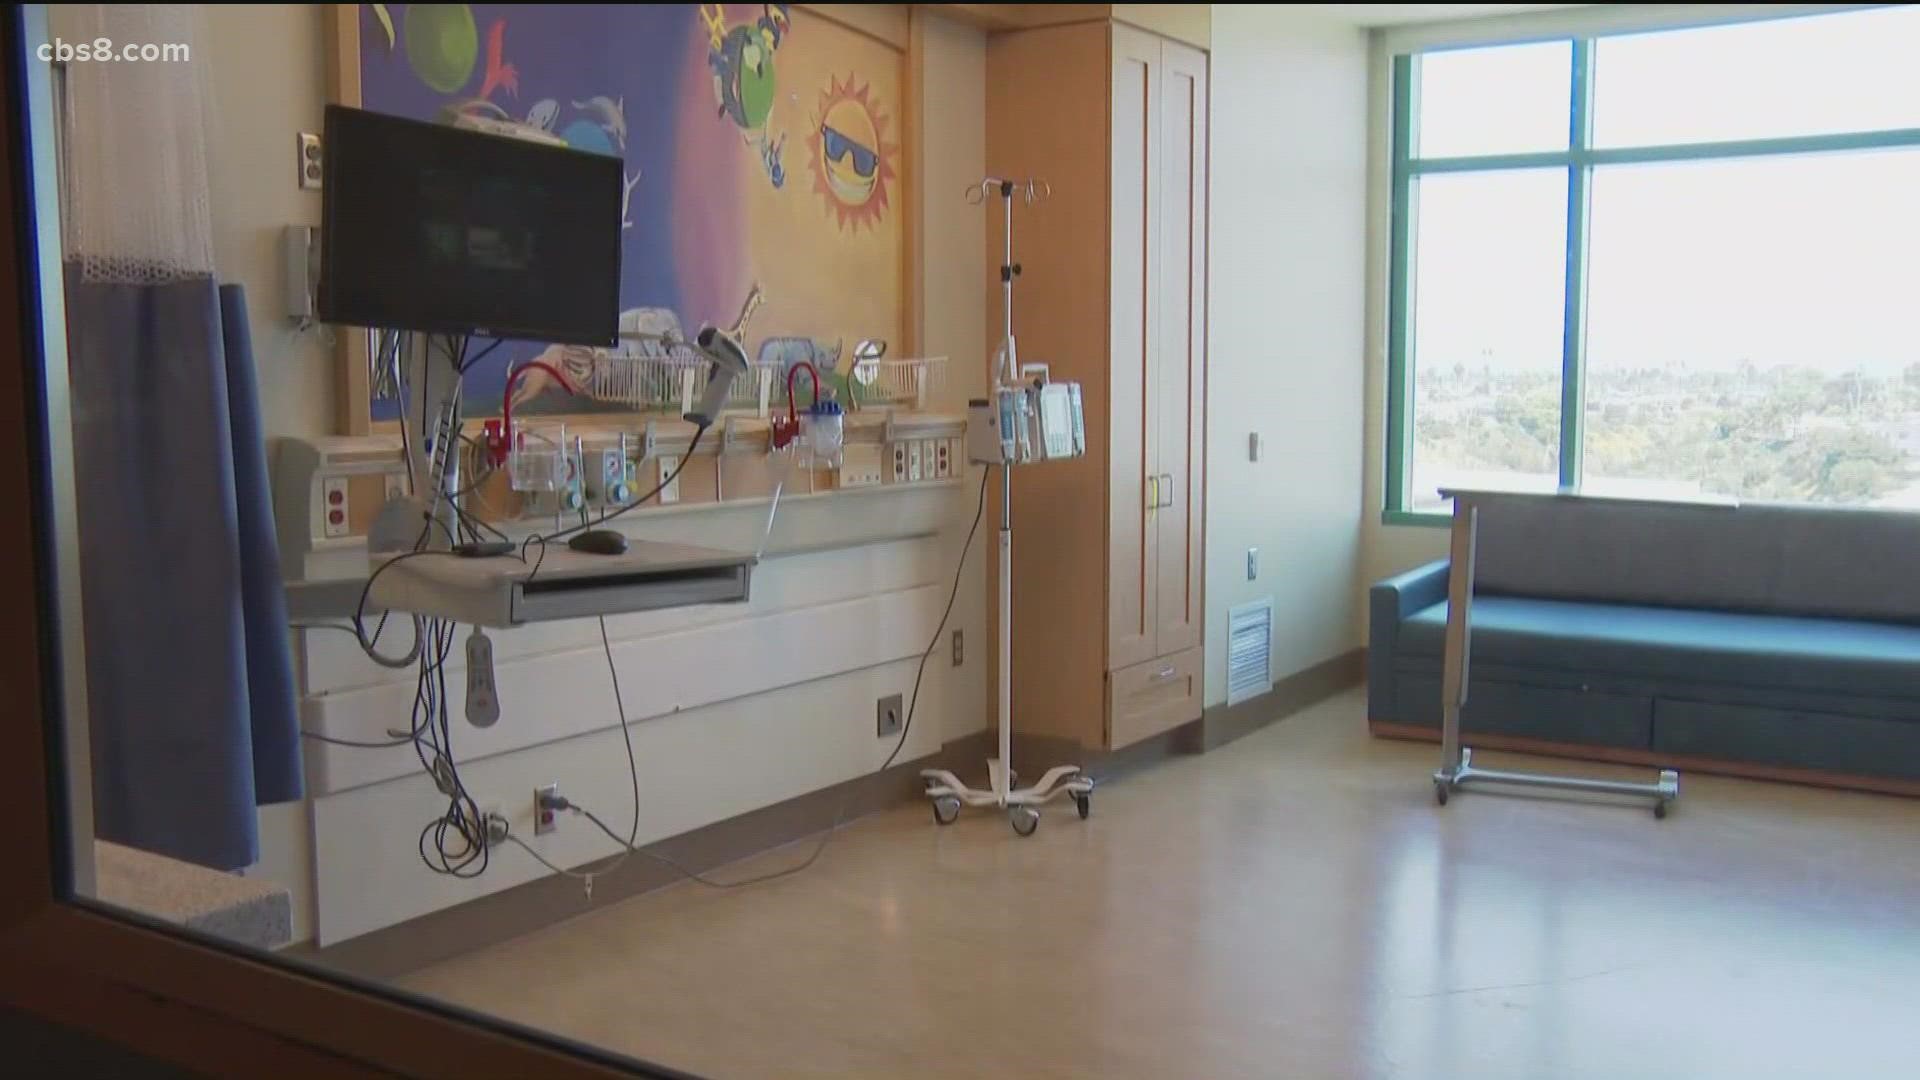 A doctor at Rady Children's hospital says 10 years ago there were about 40 kids arriving each month, seeking mental help. That number has jumped above 400 a month